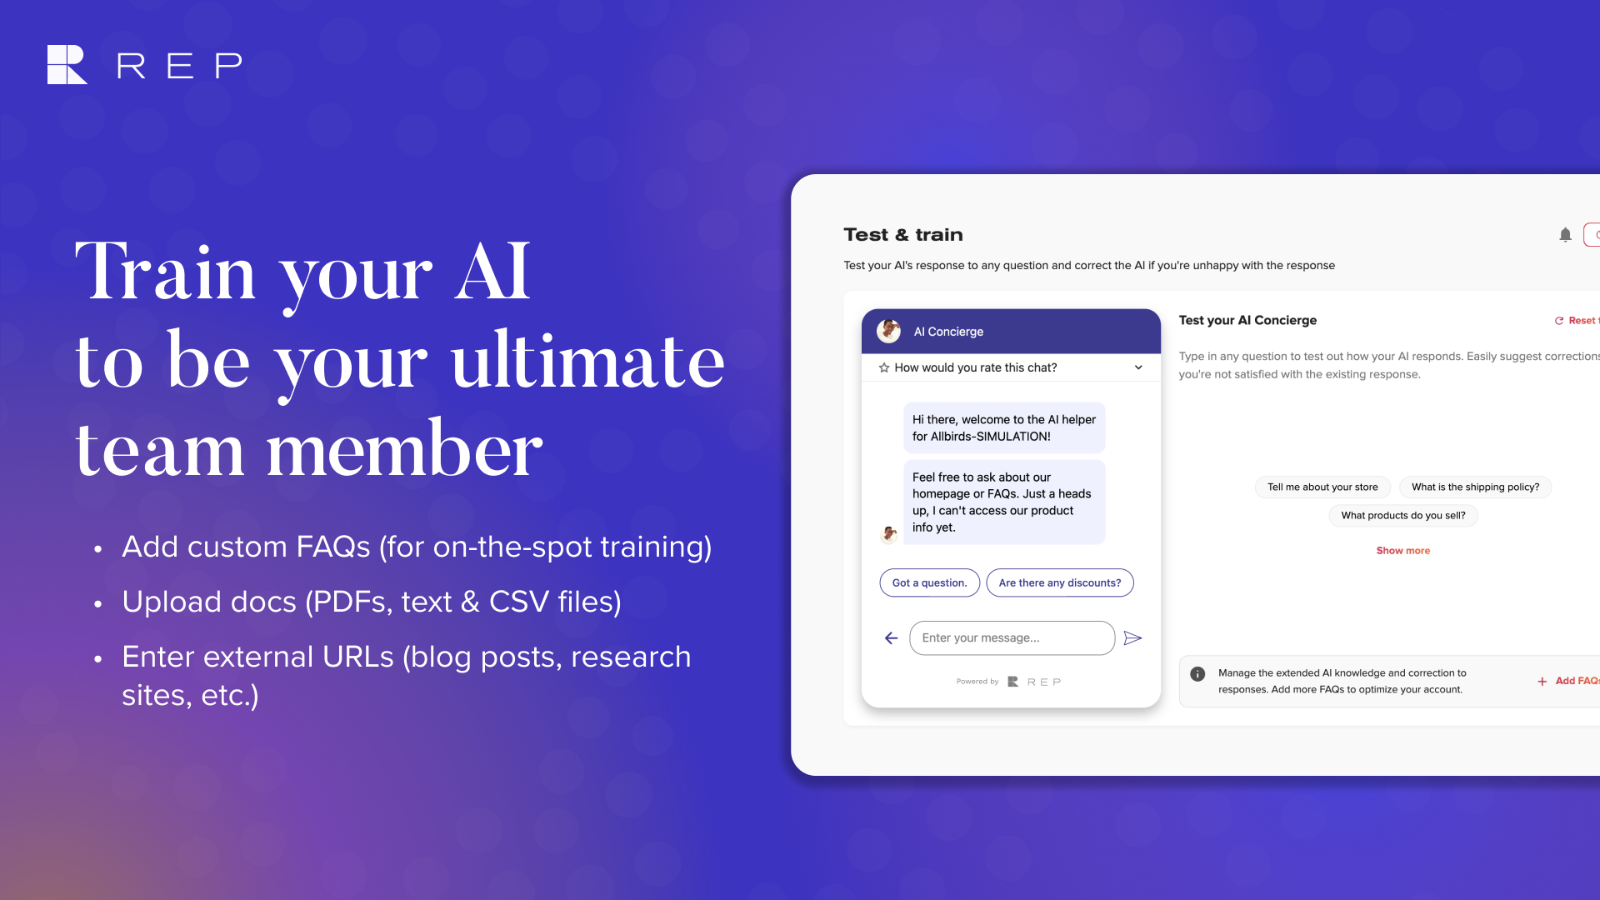 AI already knows your catalog out-of-the-box. Train the rest.